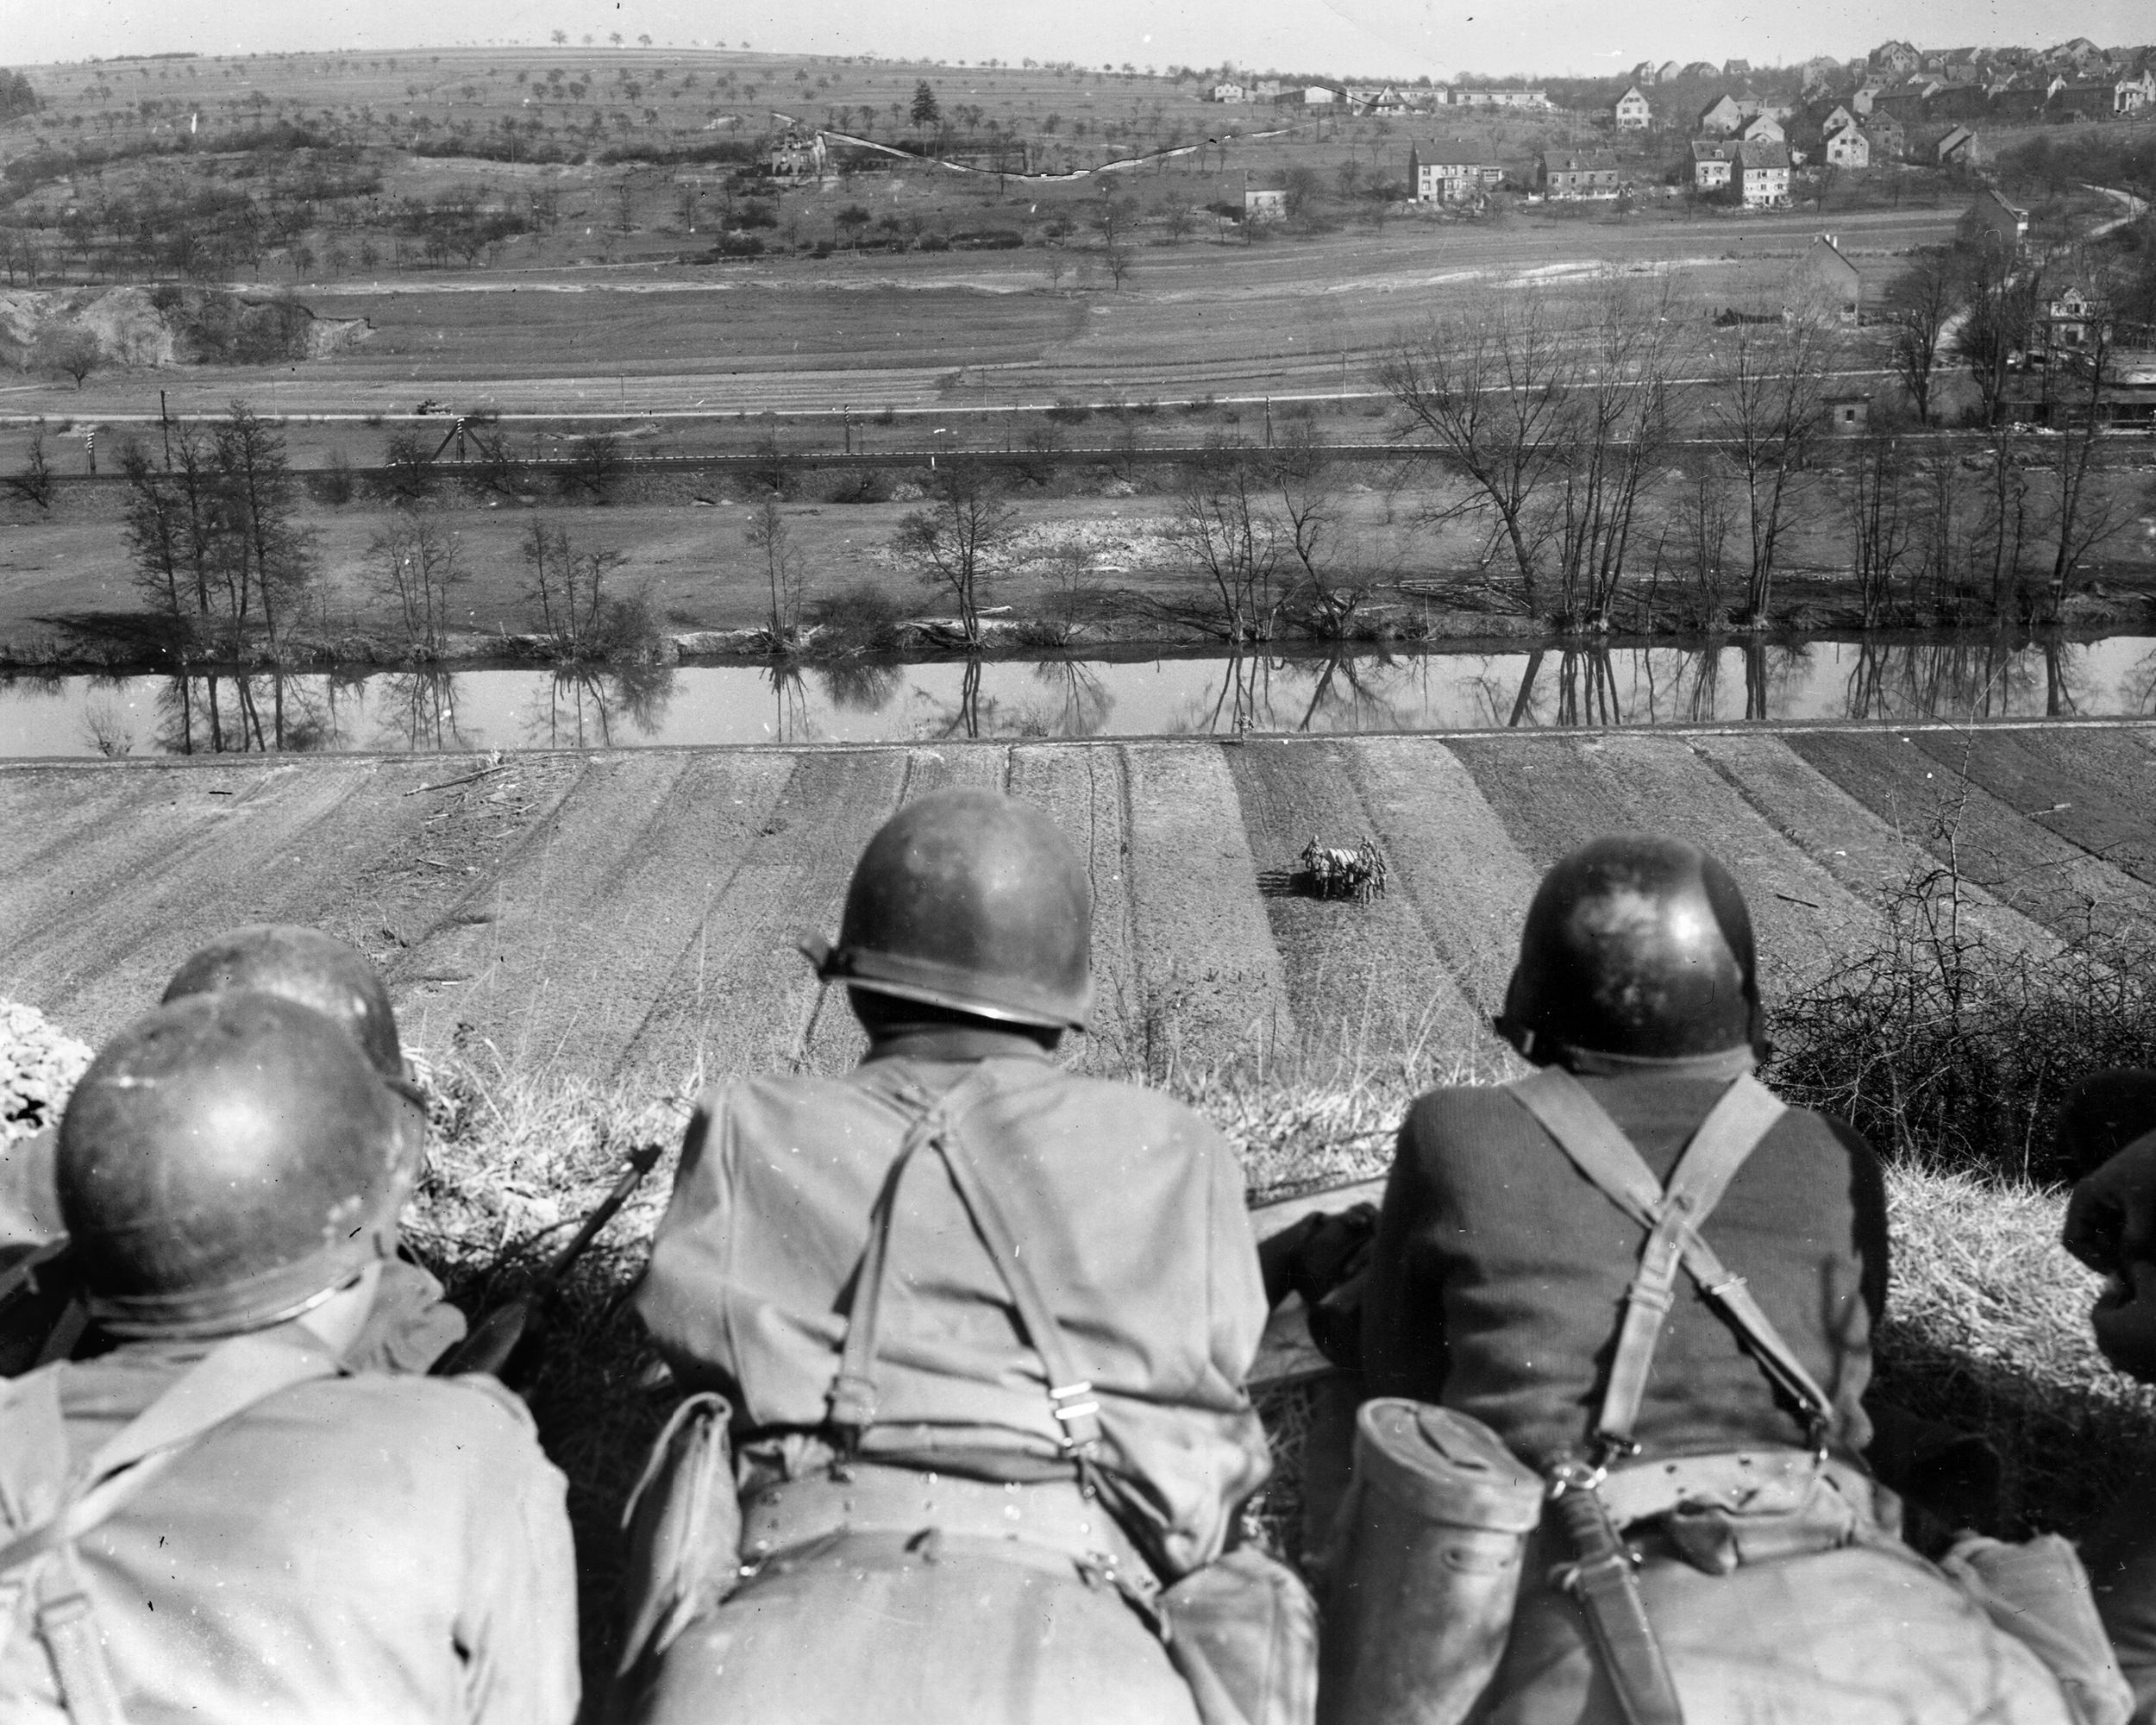 Observers on a bank overlooking the Saar River watch as men of the 3rd Battalion, 276th Regiment, carry a flat-bottom boat across a field toward the river, March 1945.